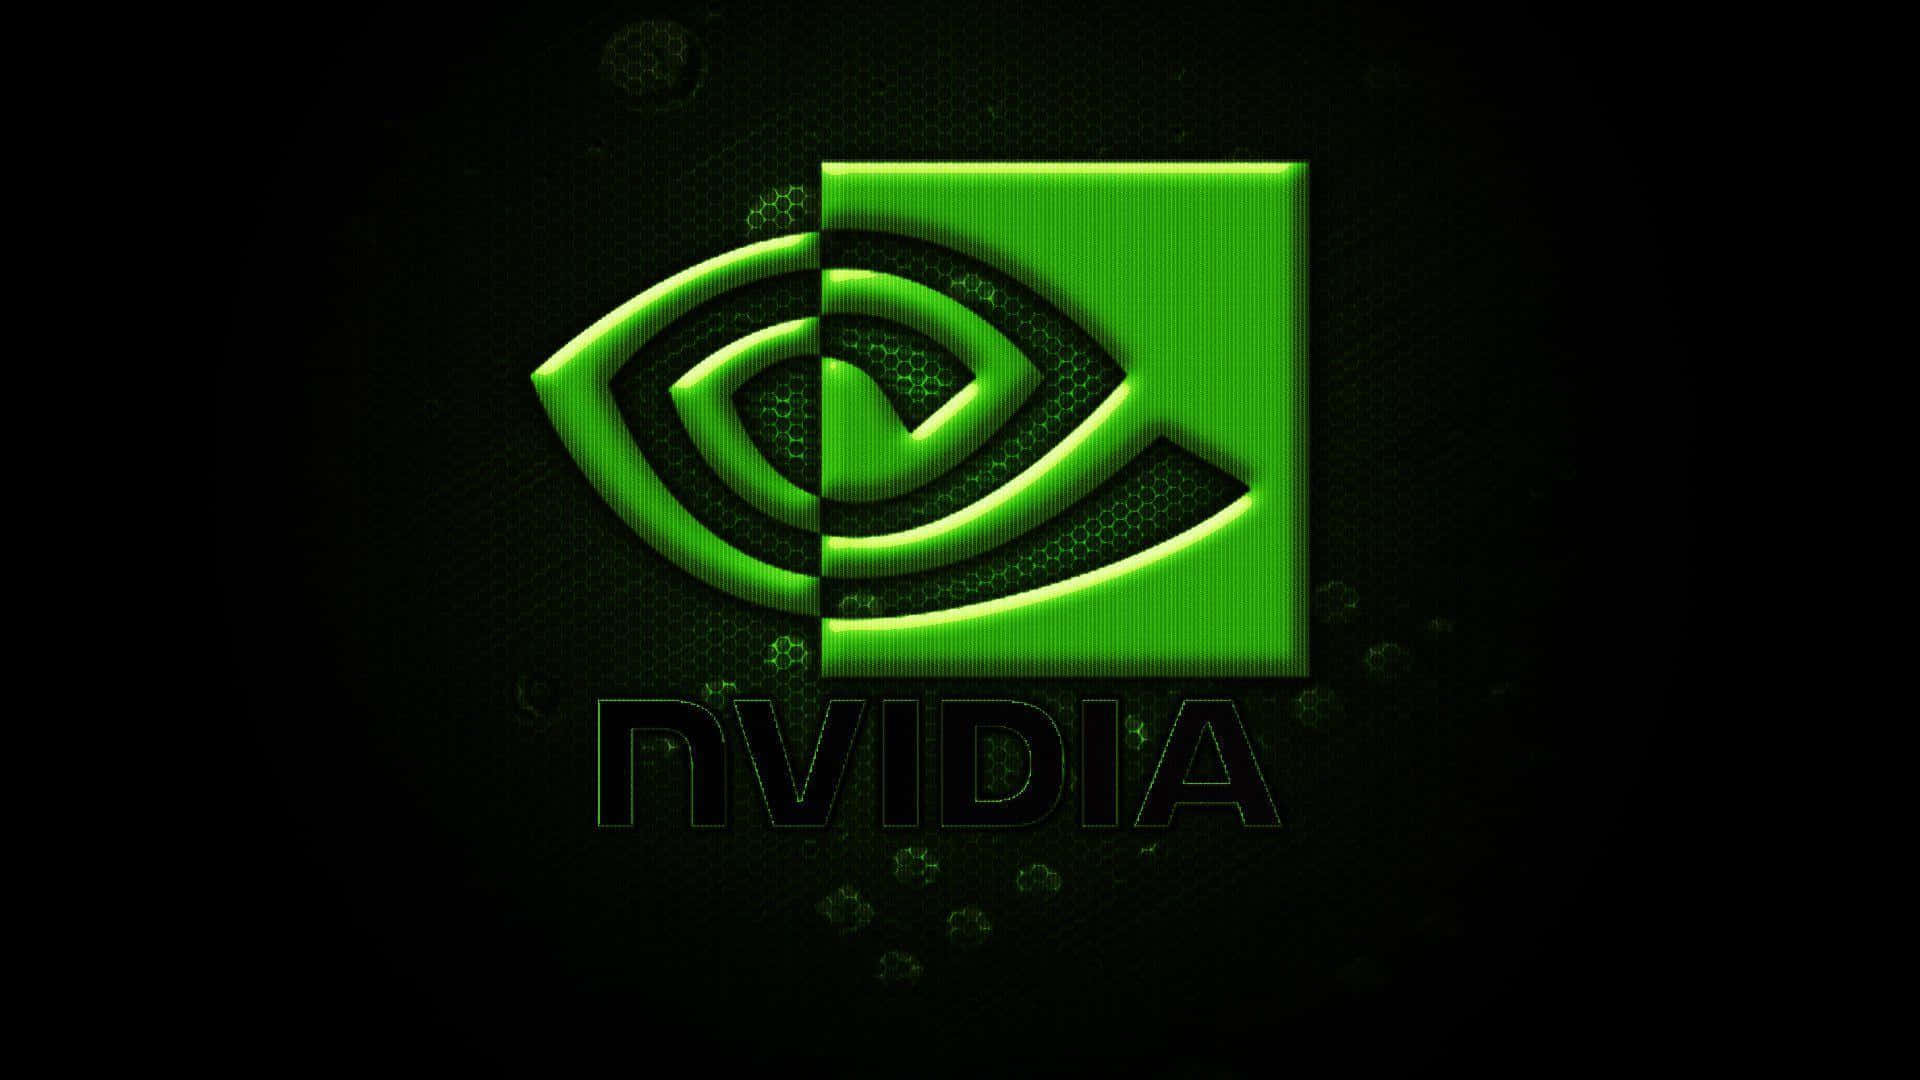 Experience the power of Nvidia graphics.